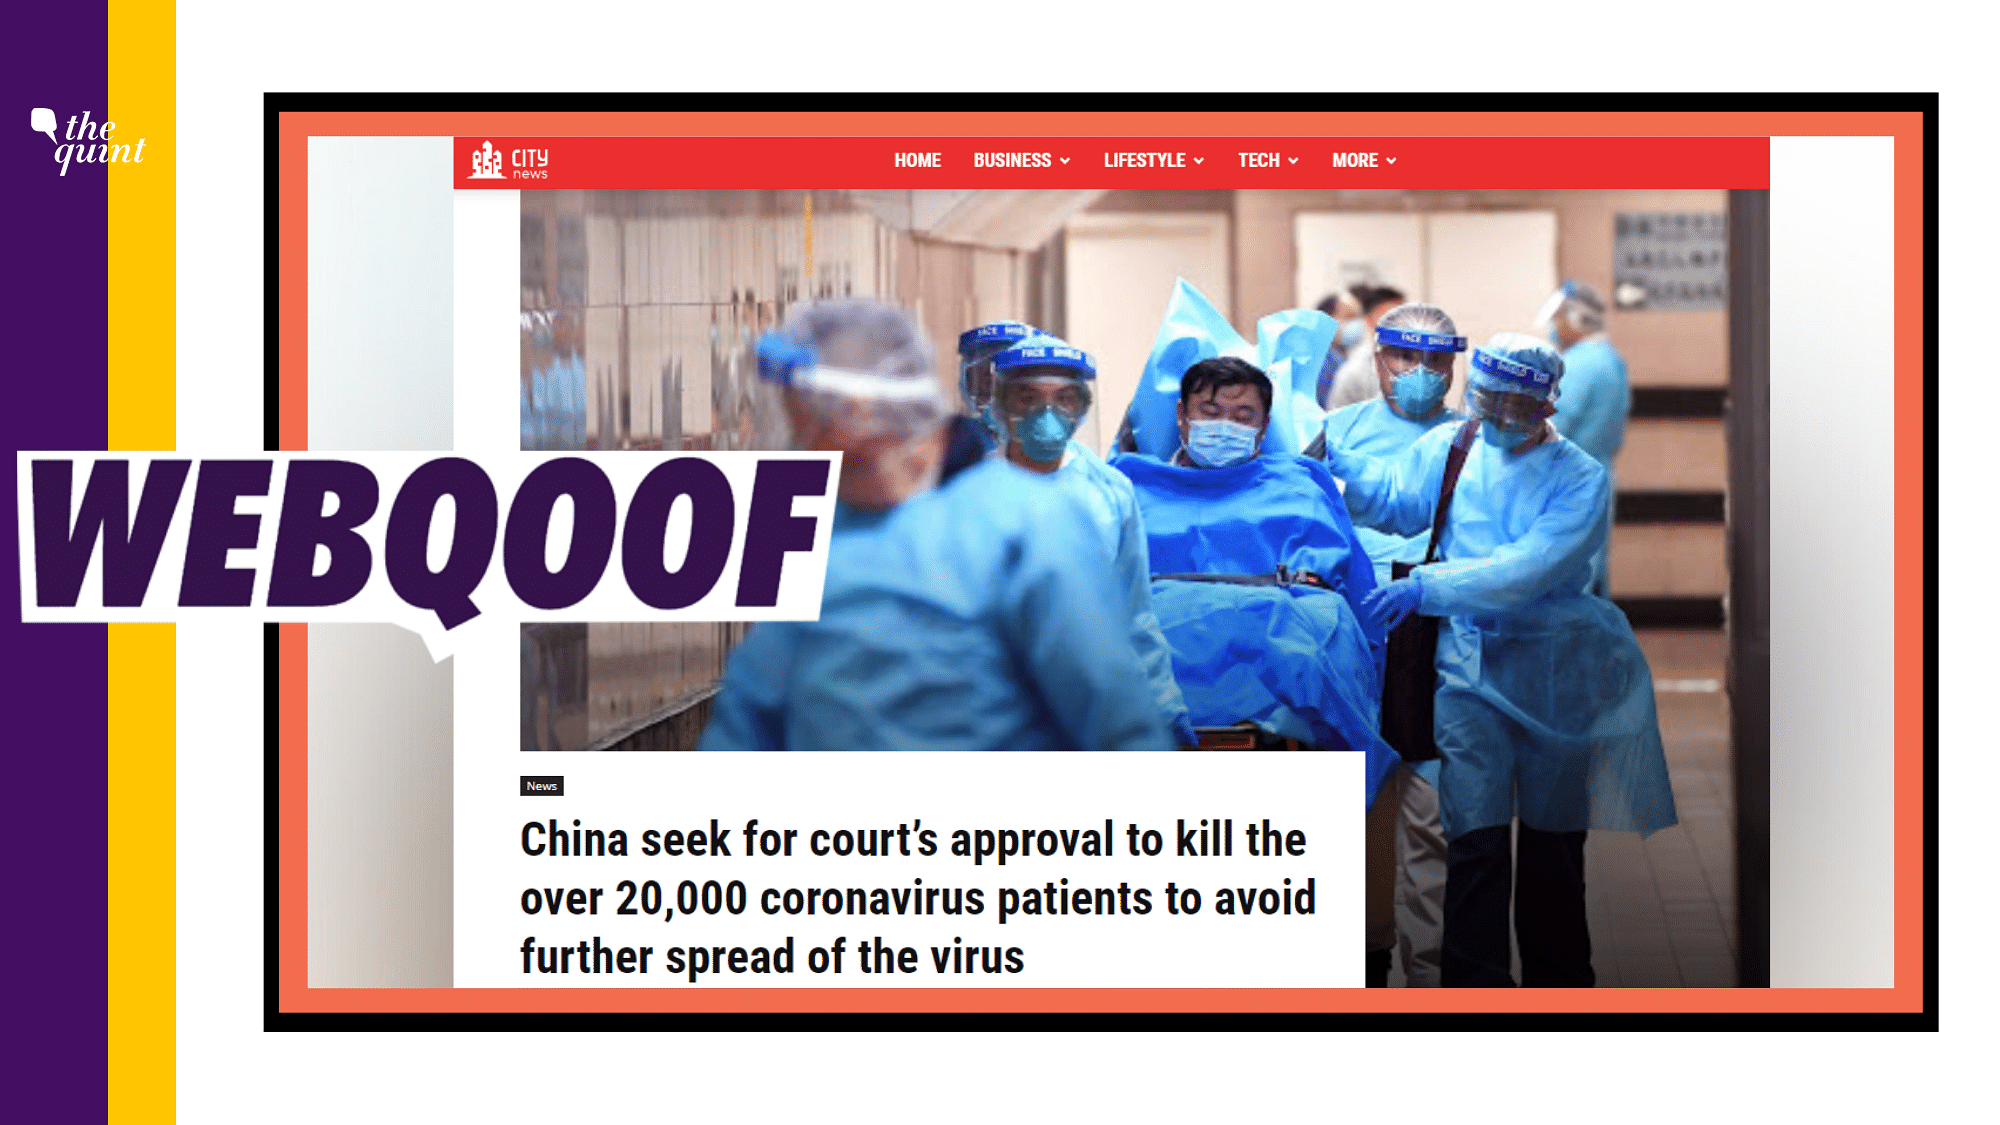 A viral article falsely claimed that China has sought court’s approval to kill 20,000 coronavirus patients.